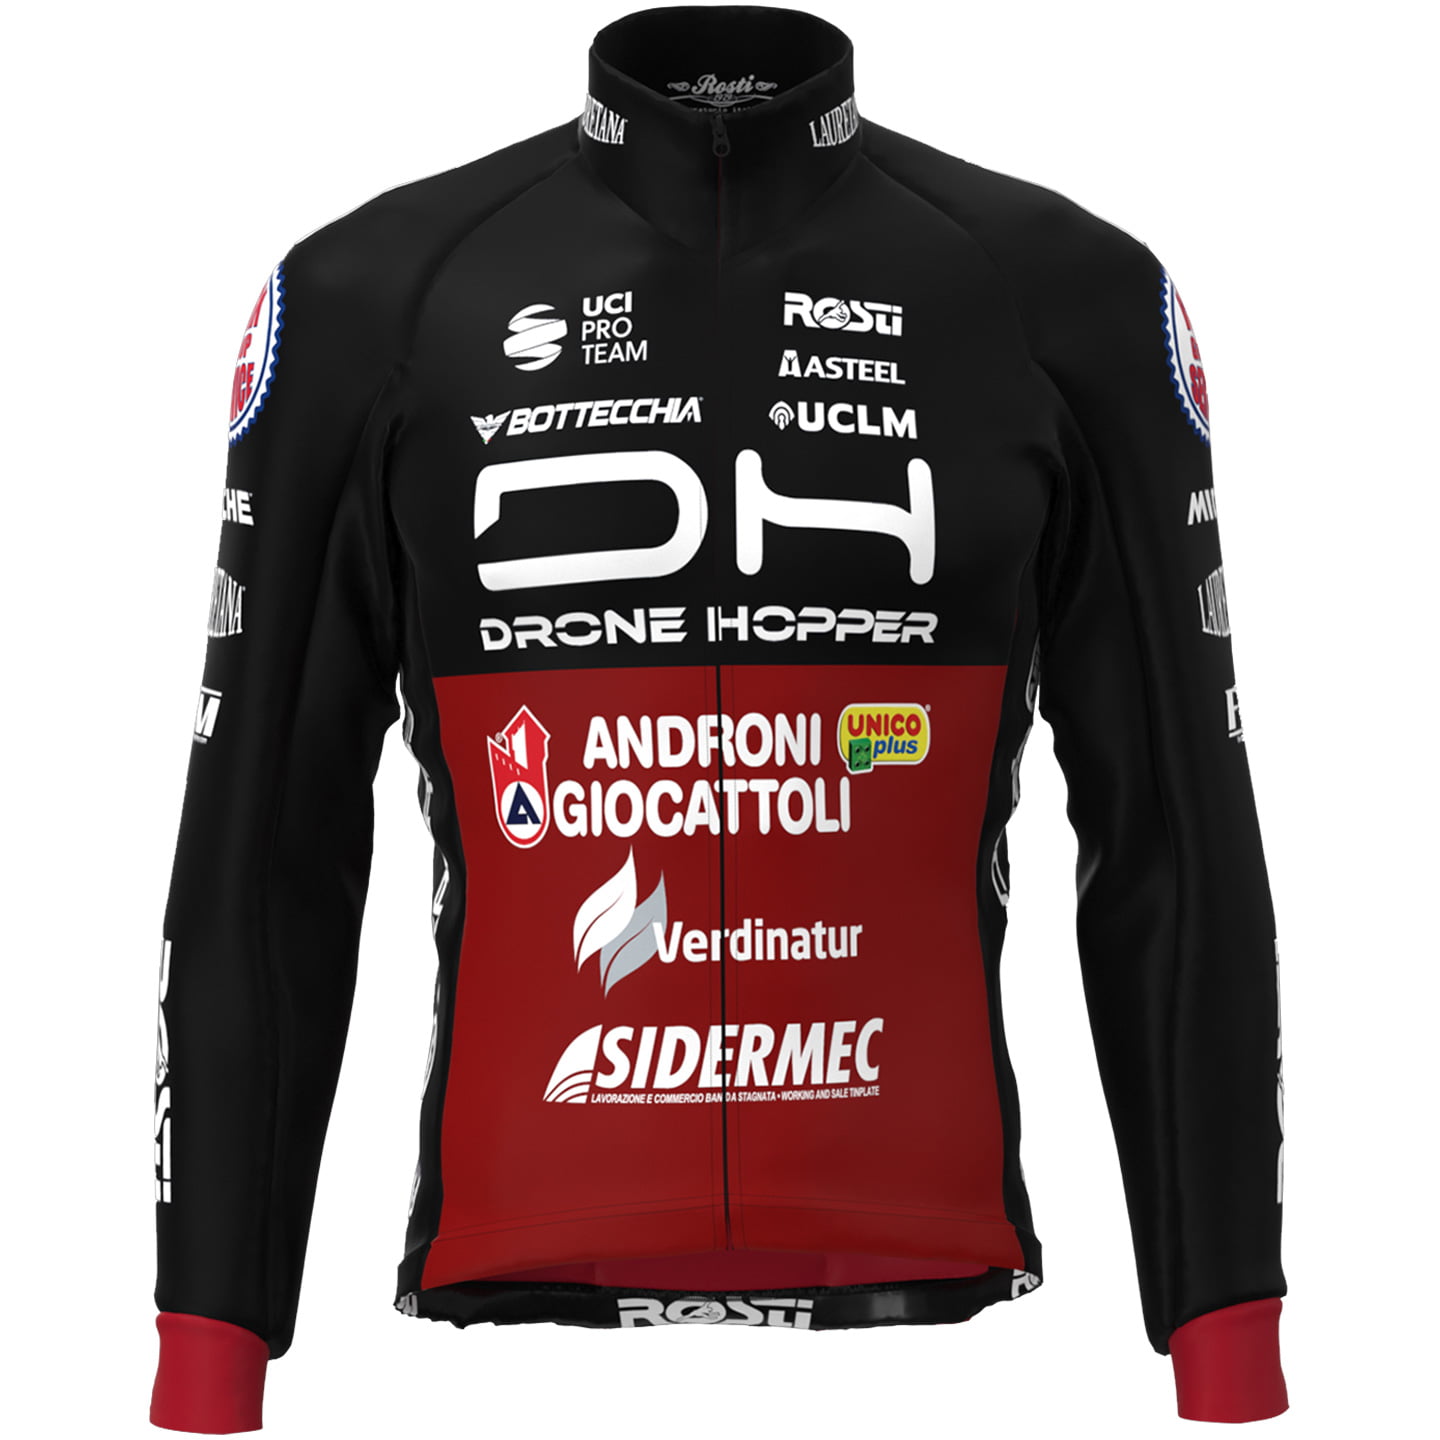 DRONE HOPPER - ANDRONI GIOCATTOLI 2022 Thermal Jacket, for men, size L, Cycle jacket, Cycle gear